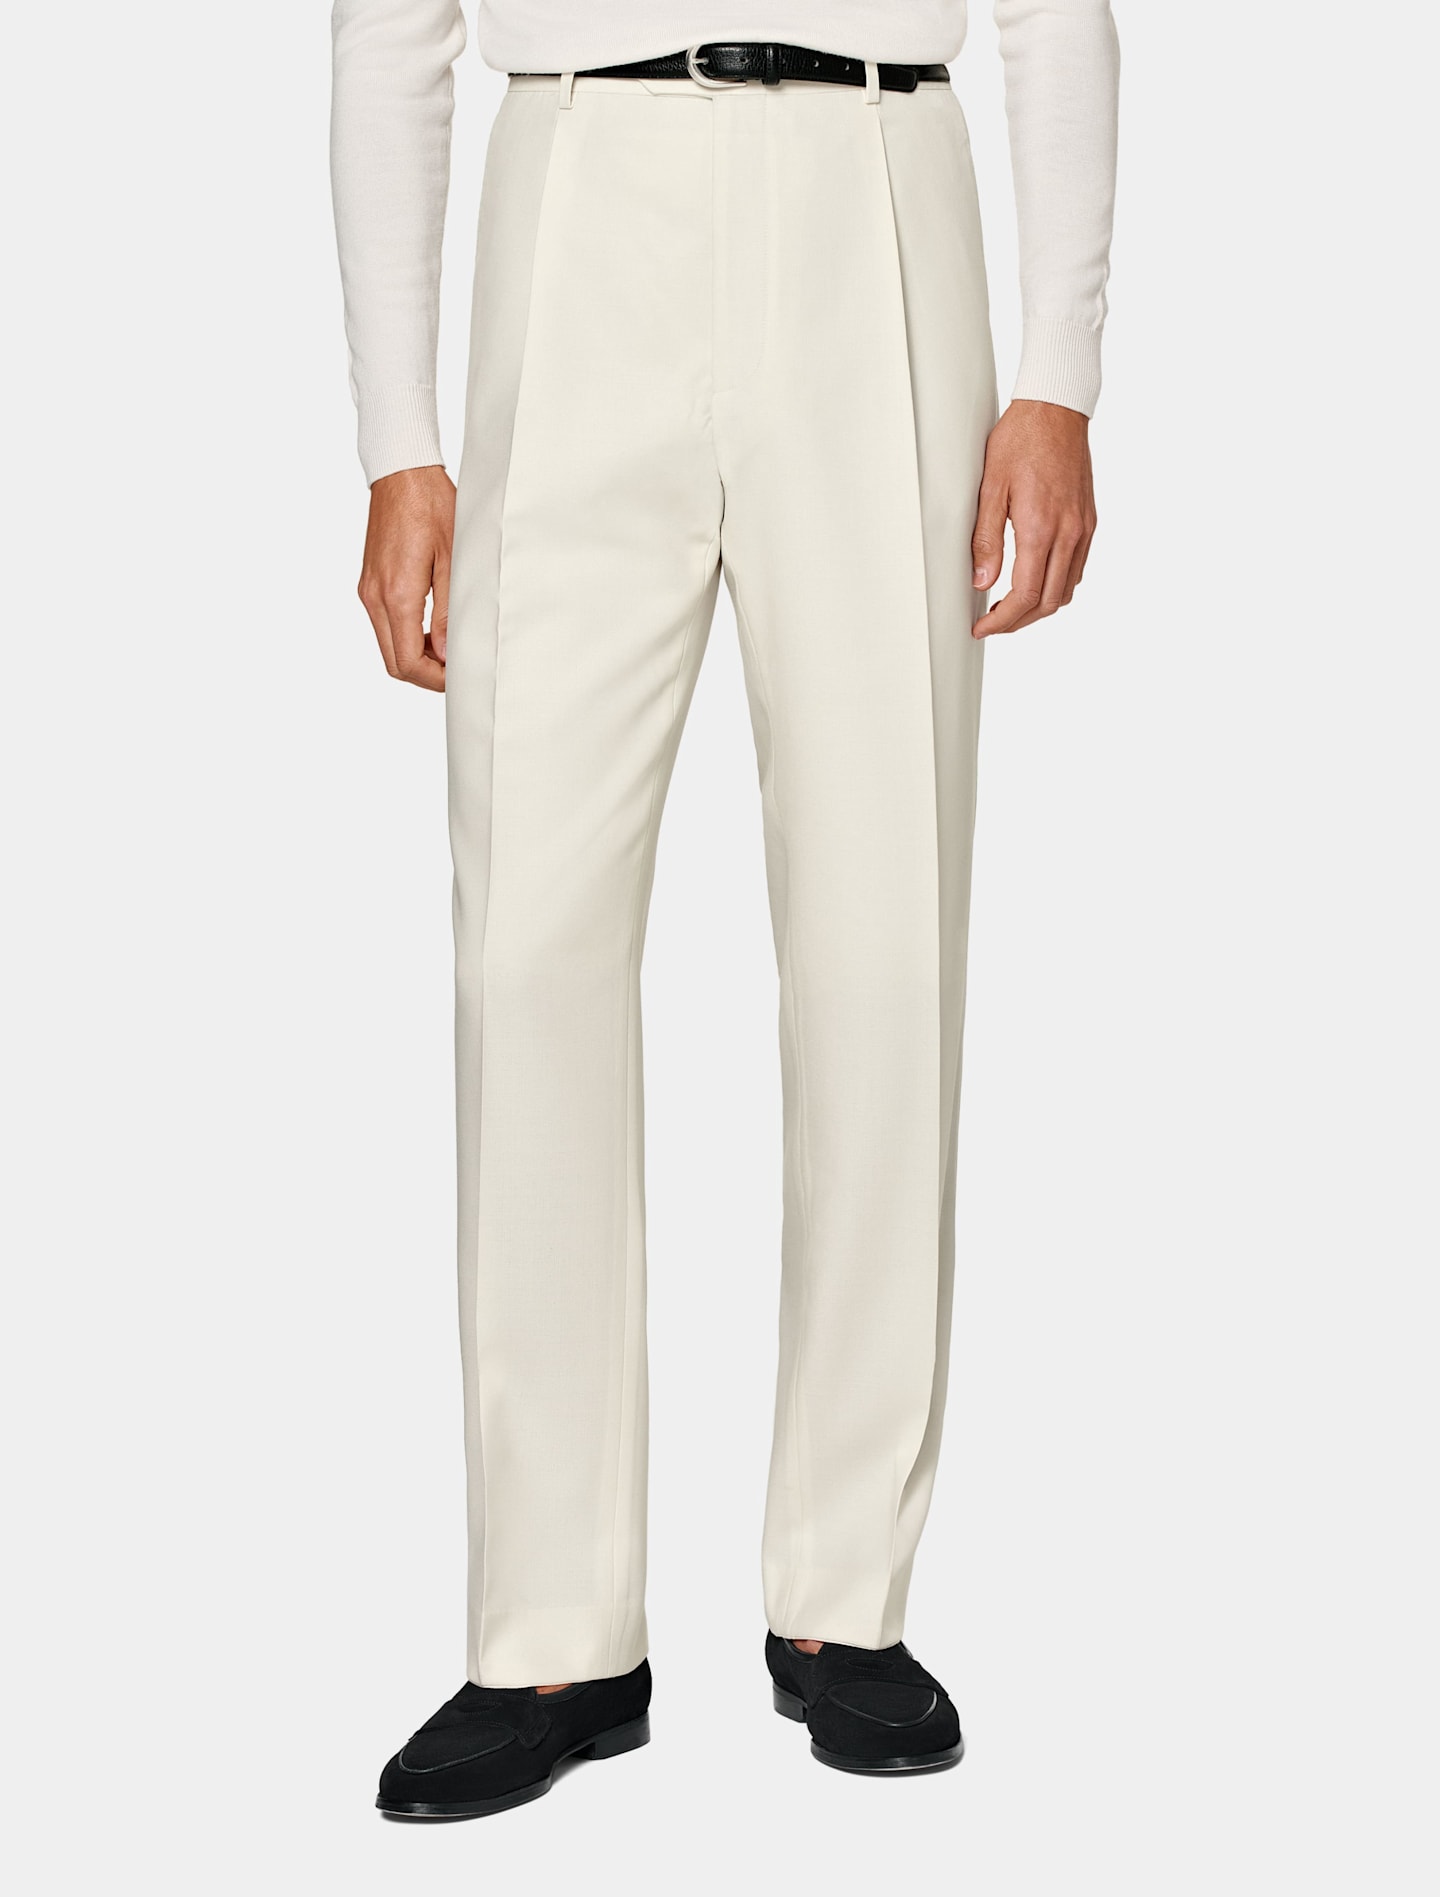 Off-white straight-fit trousers with black belt and loafers.